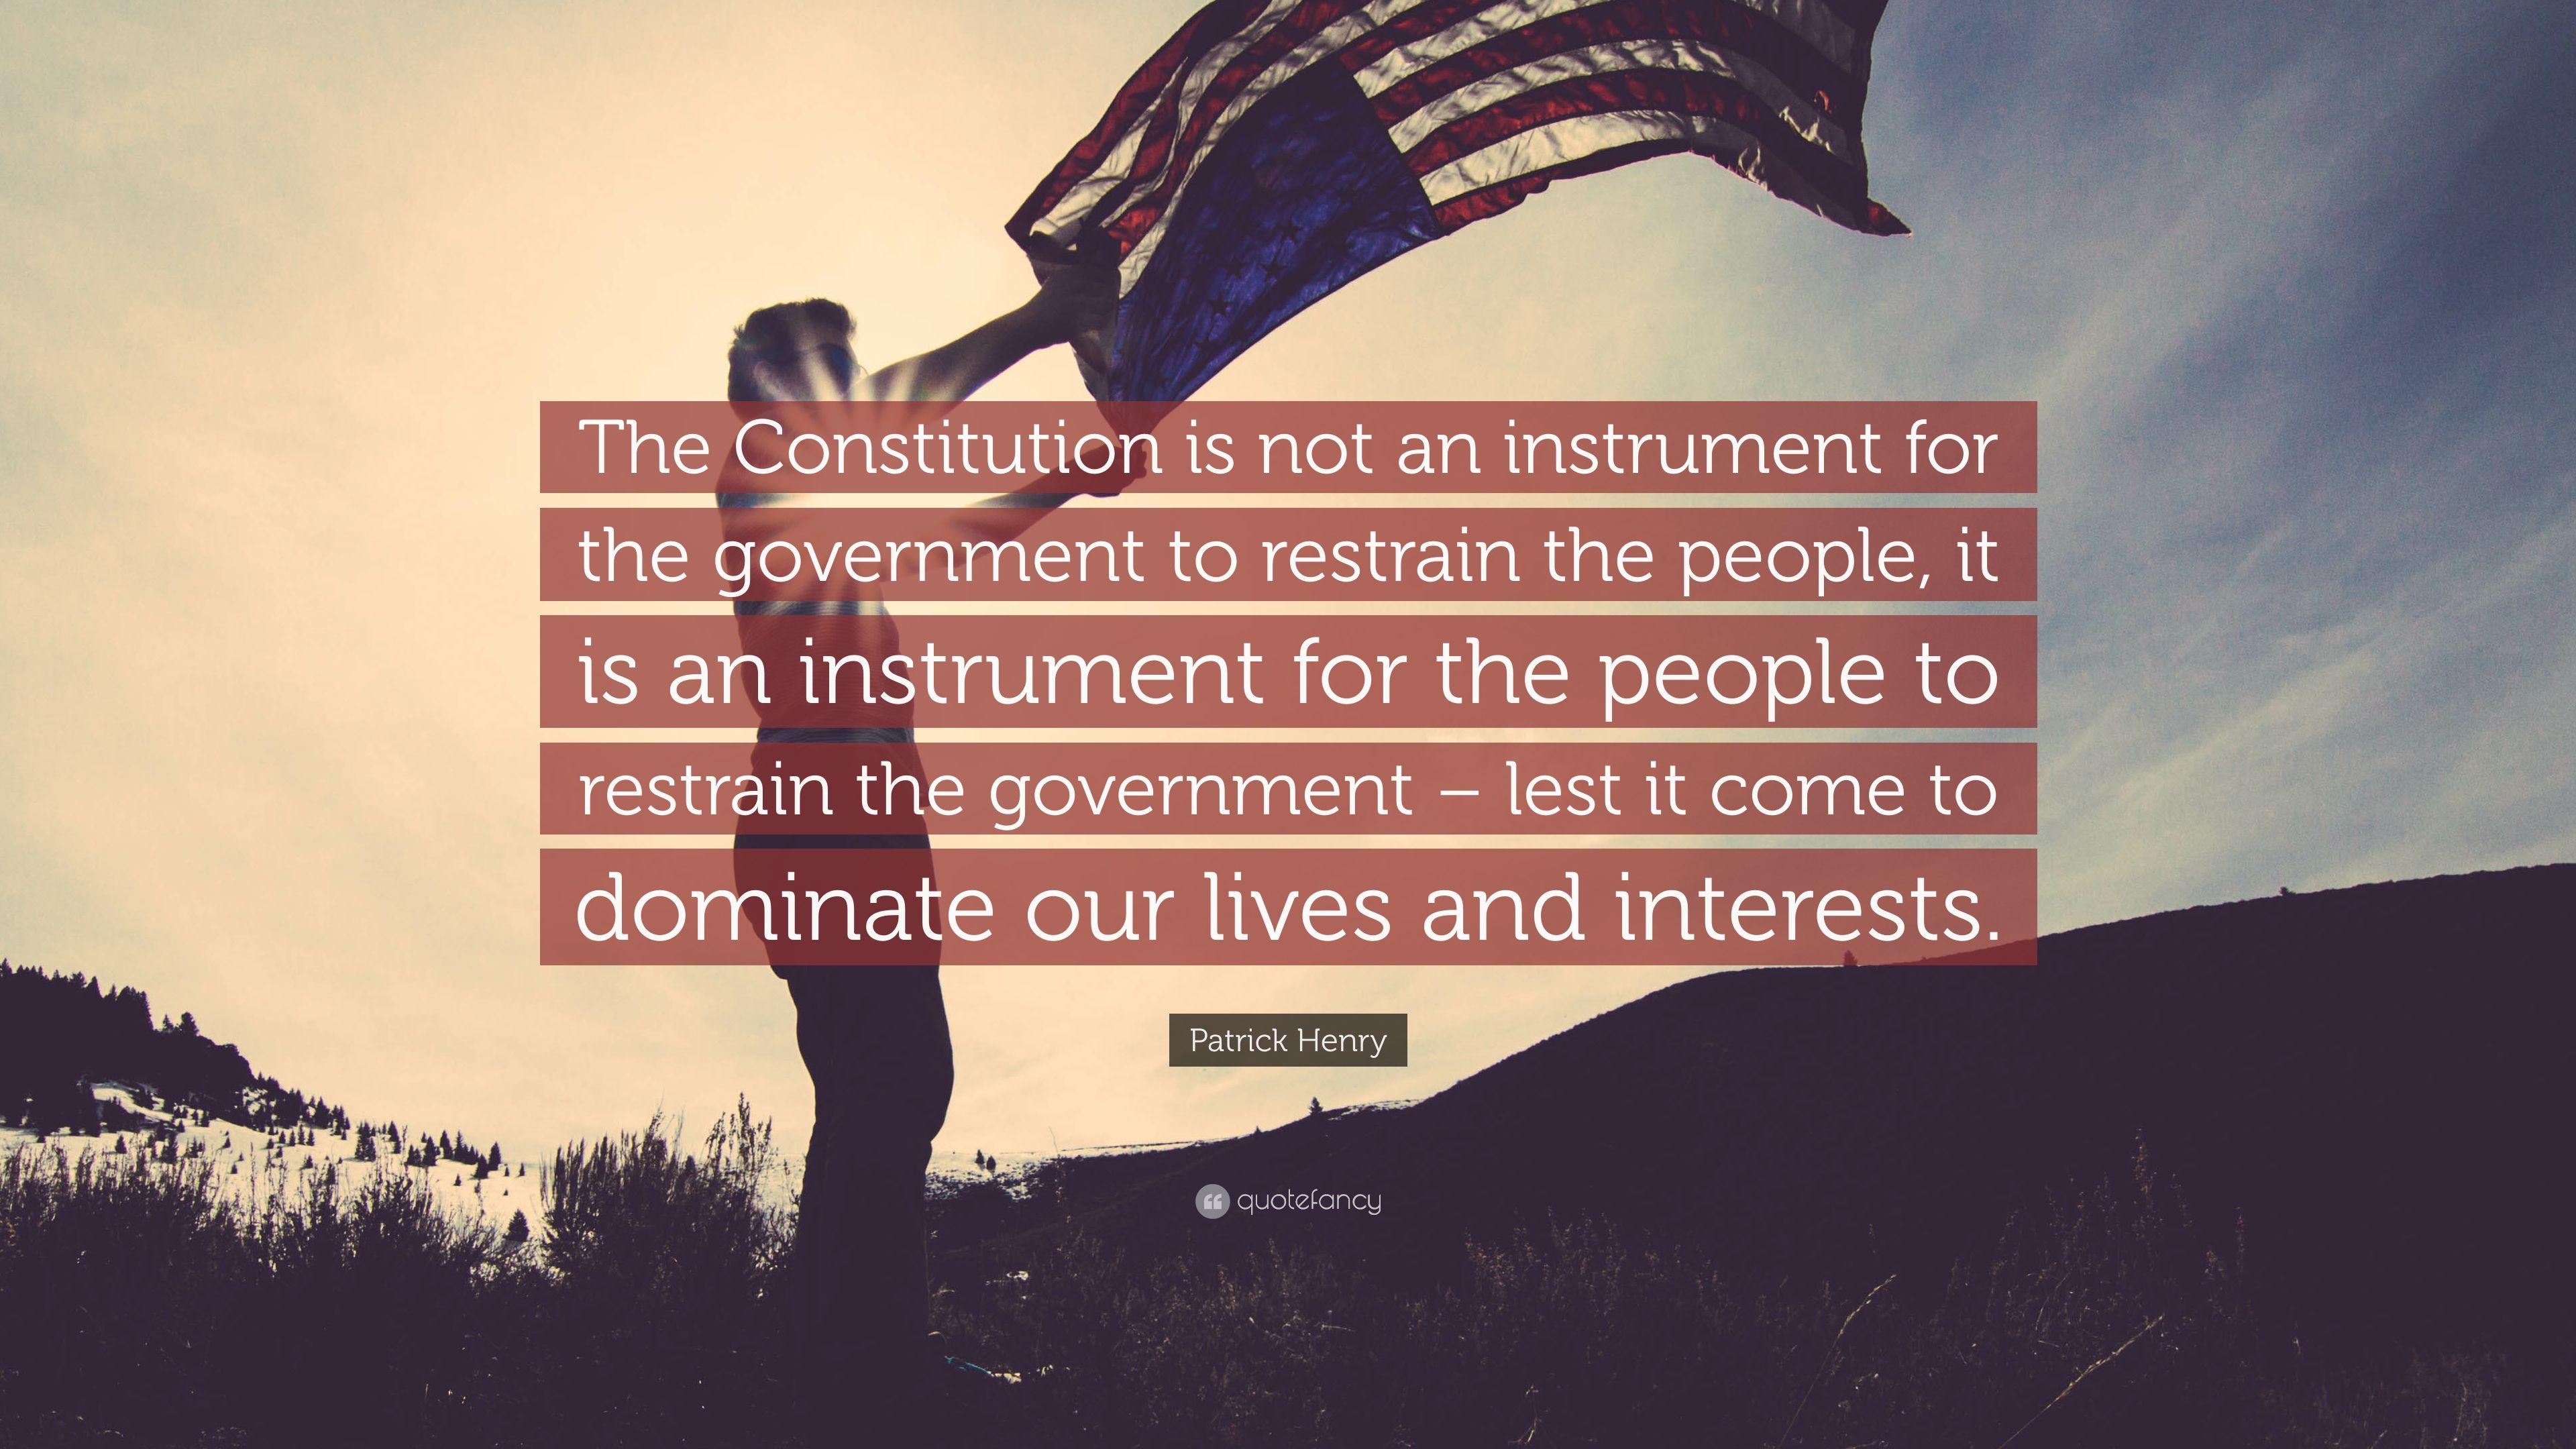 Patrick Henry Quote: “The Constitution is not an instrument for